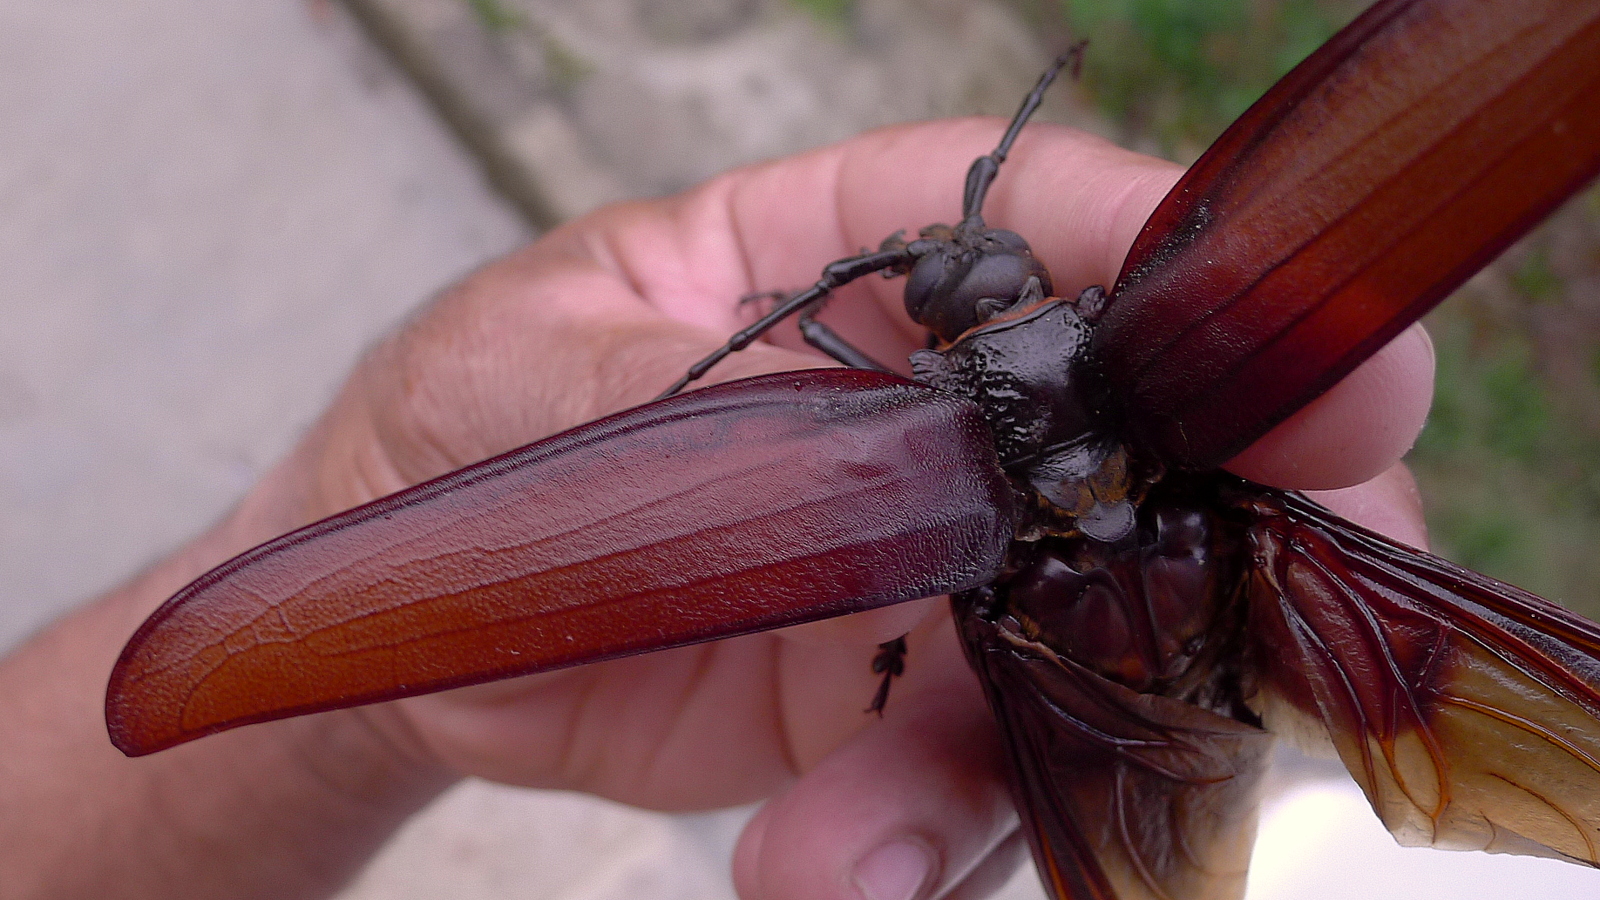 a large insect sitting on top of a person's hand